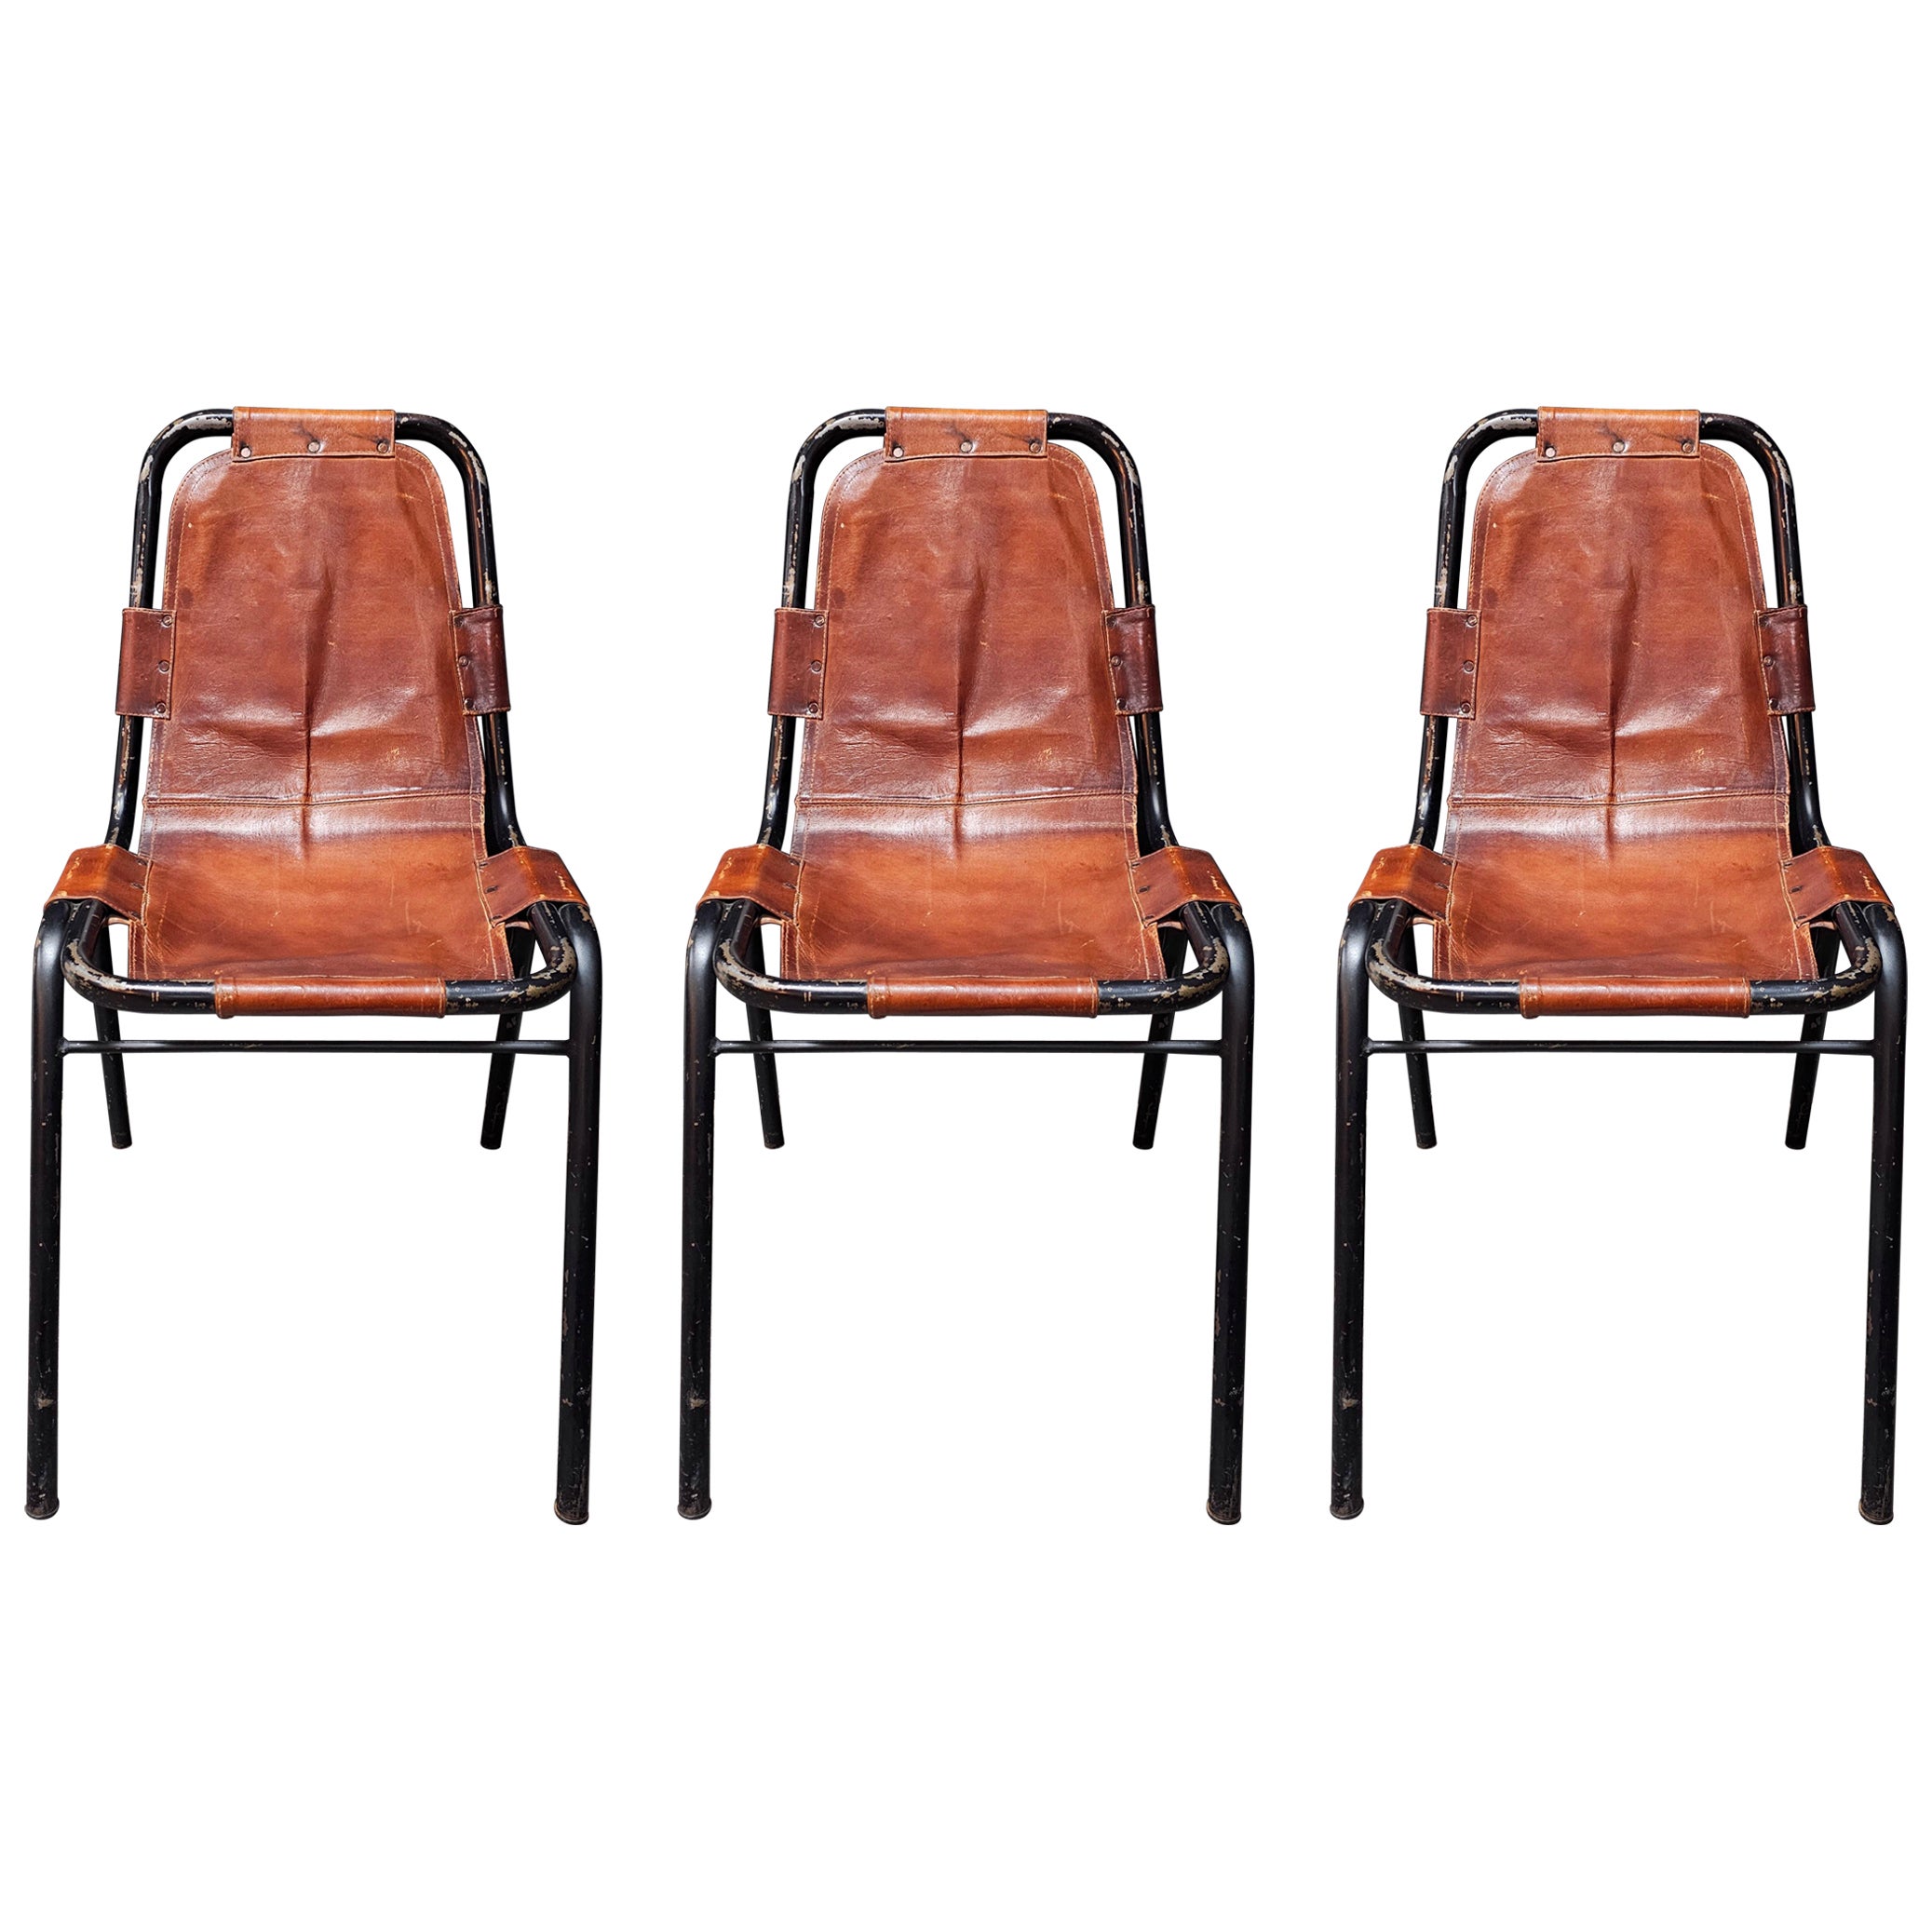 Set of 3 Leather Chairs by DalVera in style of Charlotte Perriand, France, 1950s For Sale